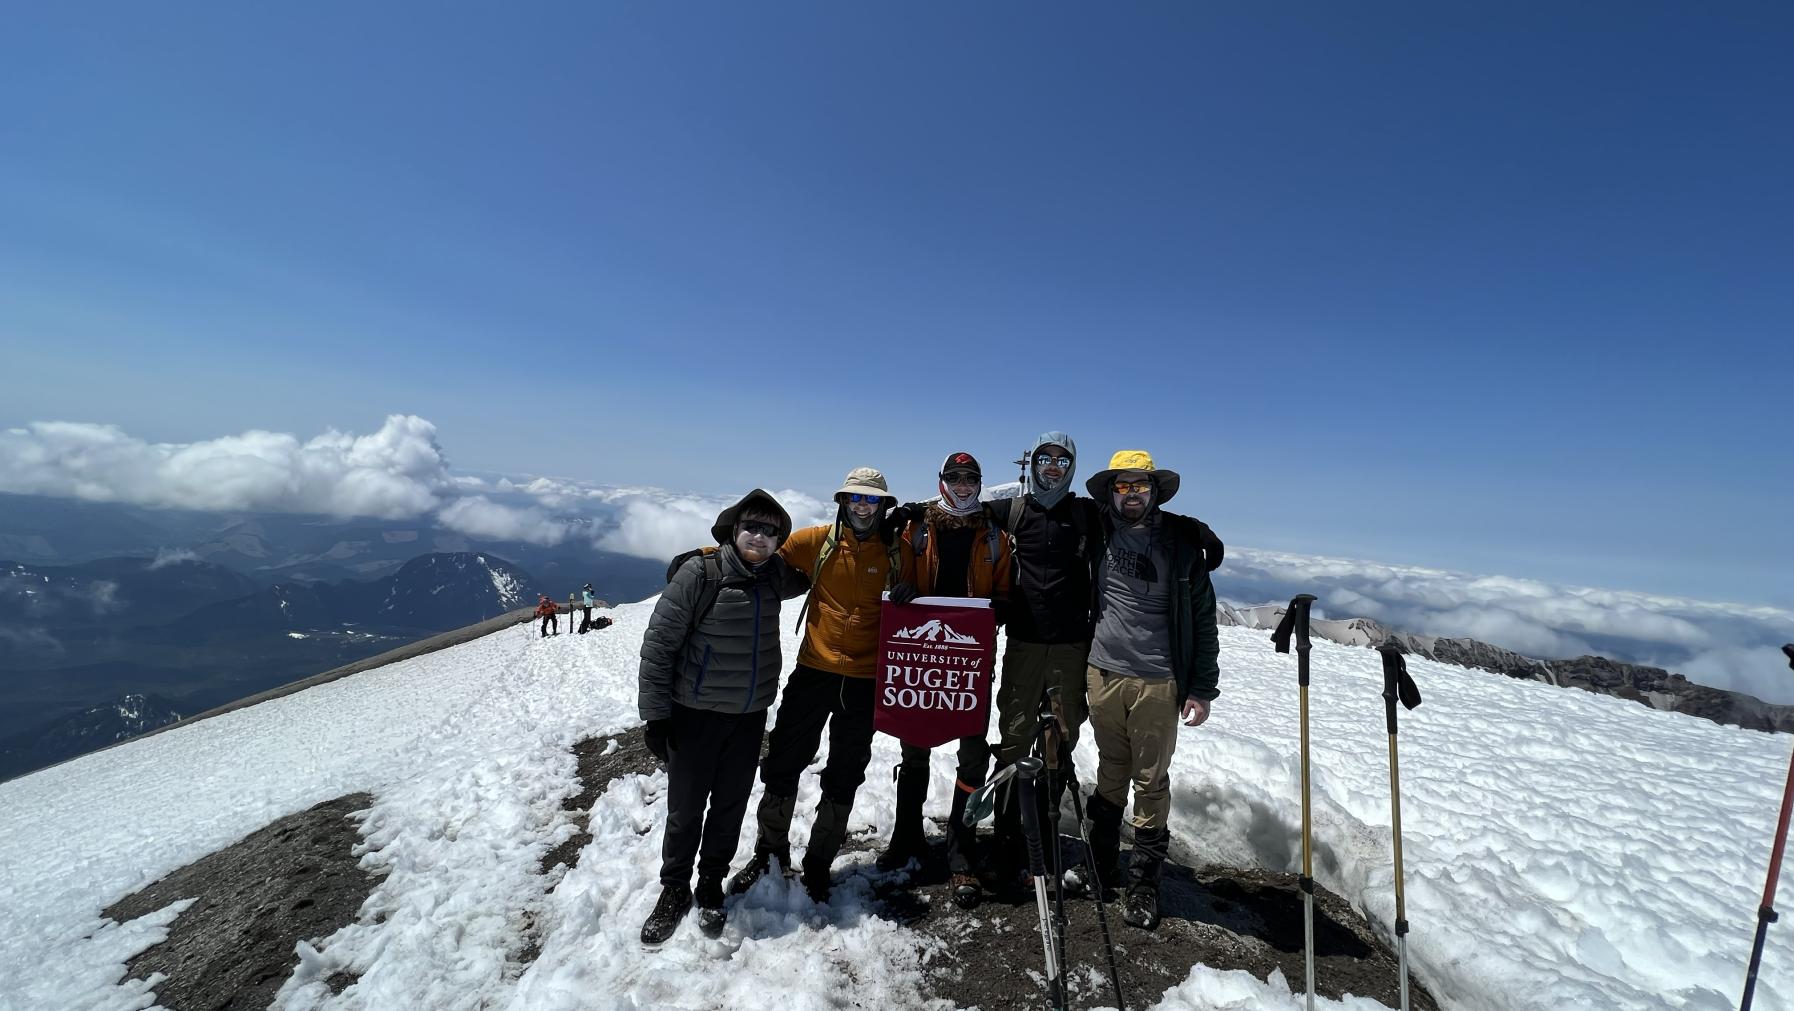 PacTrail students display a Puget Sound banner at the summit of Mount St. Helens.